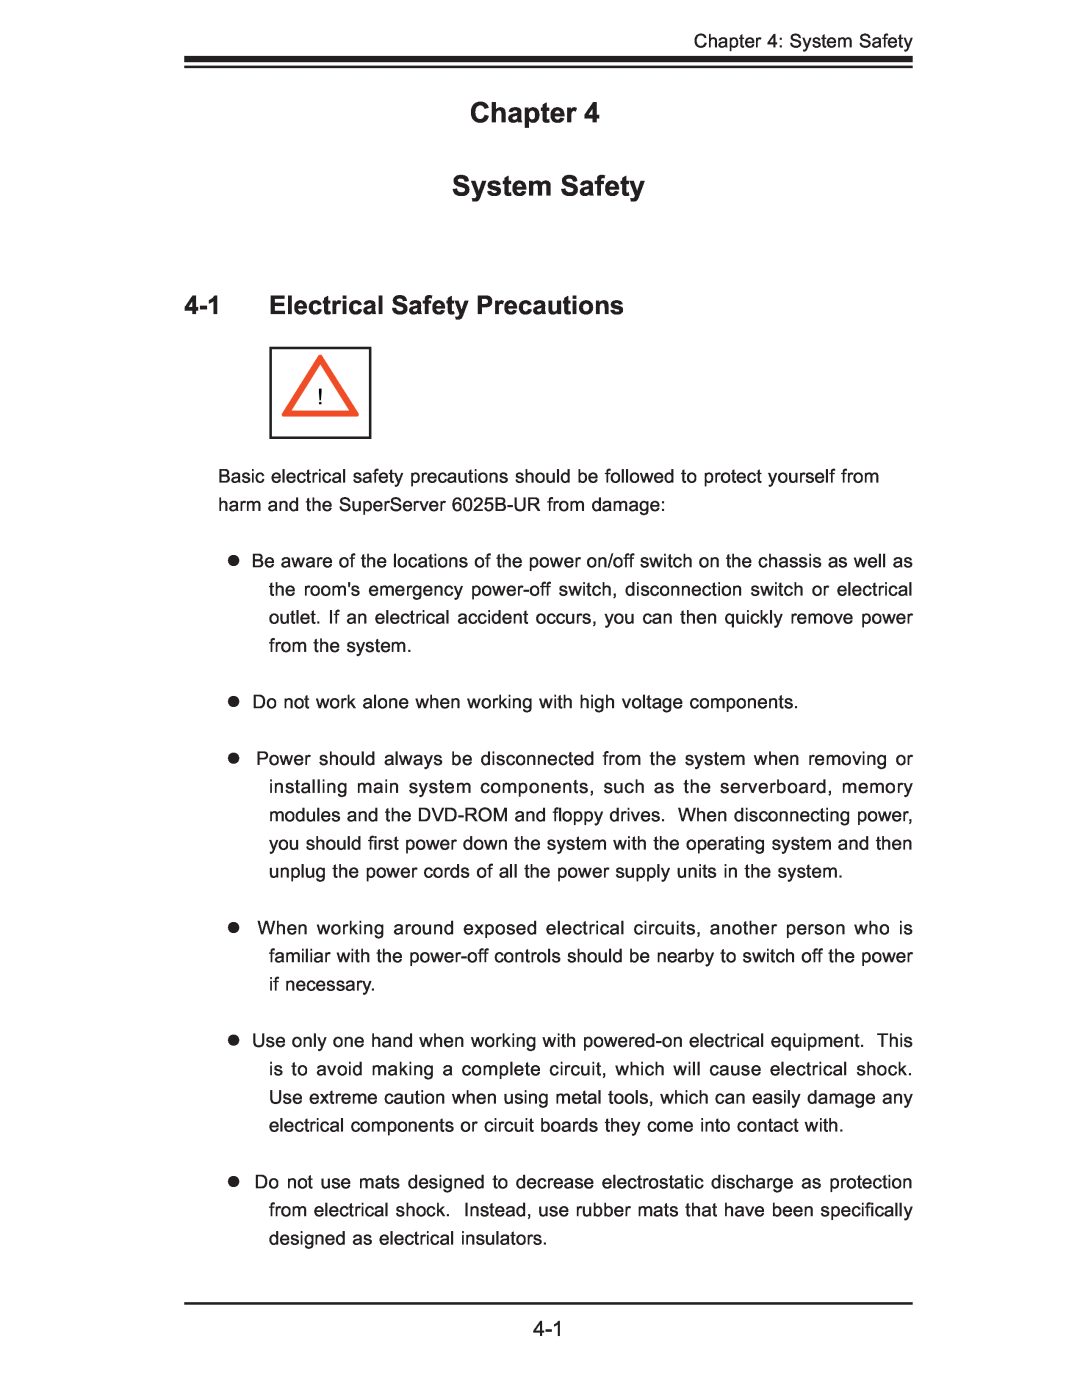 SUPER MICRO Computer 6025B-UR user manual Chapter System Safety, Electrical Safety Precautions 